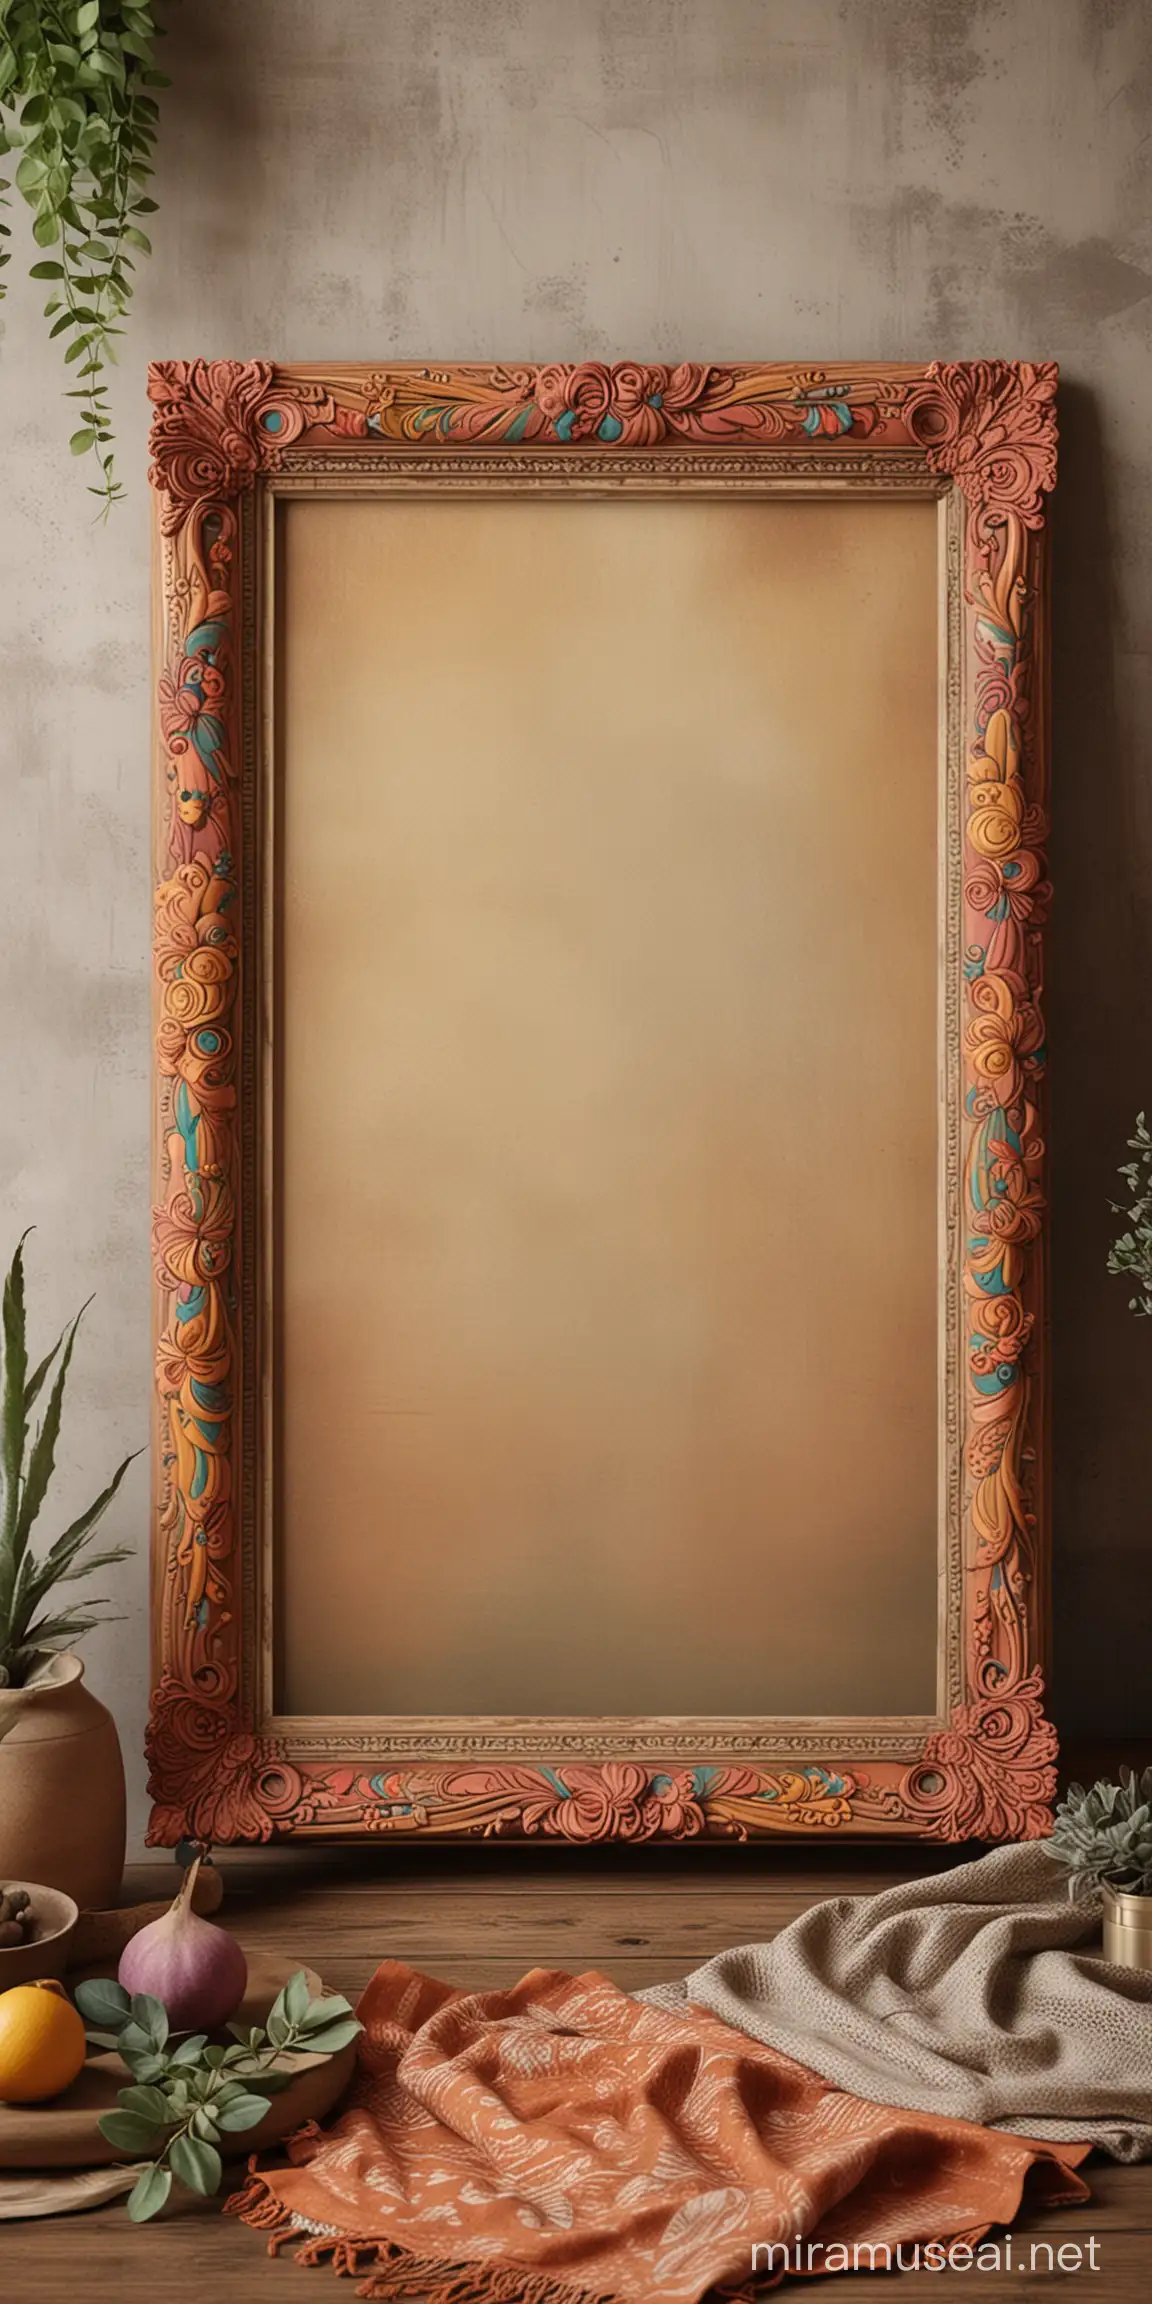 Bohemian Style A2 Frame Mockup with Vibrant Colors and Eclectic Materials